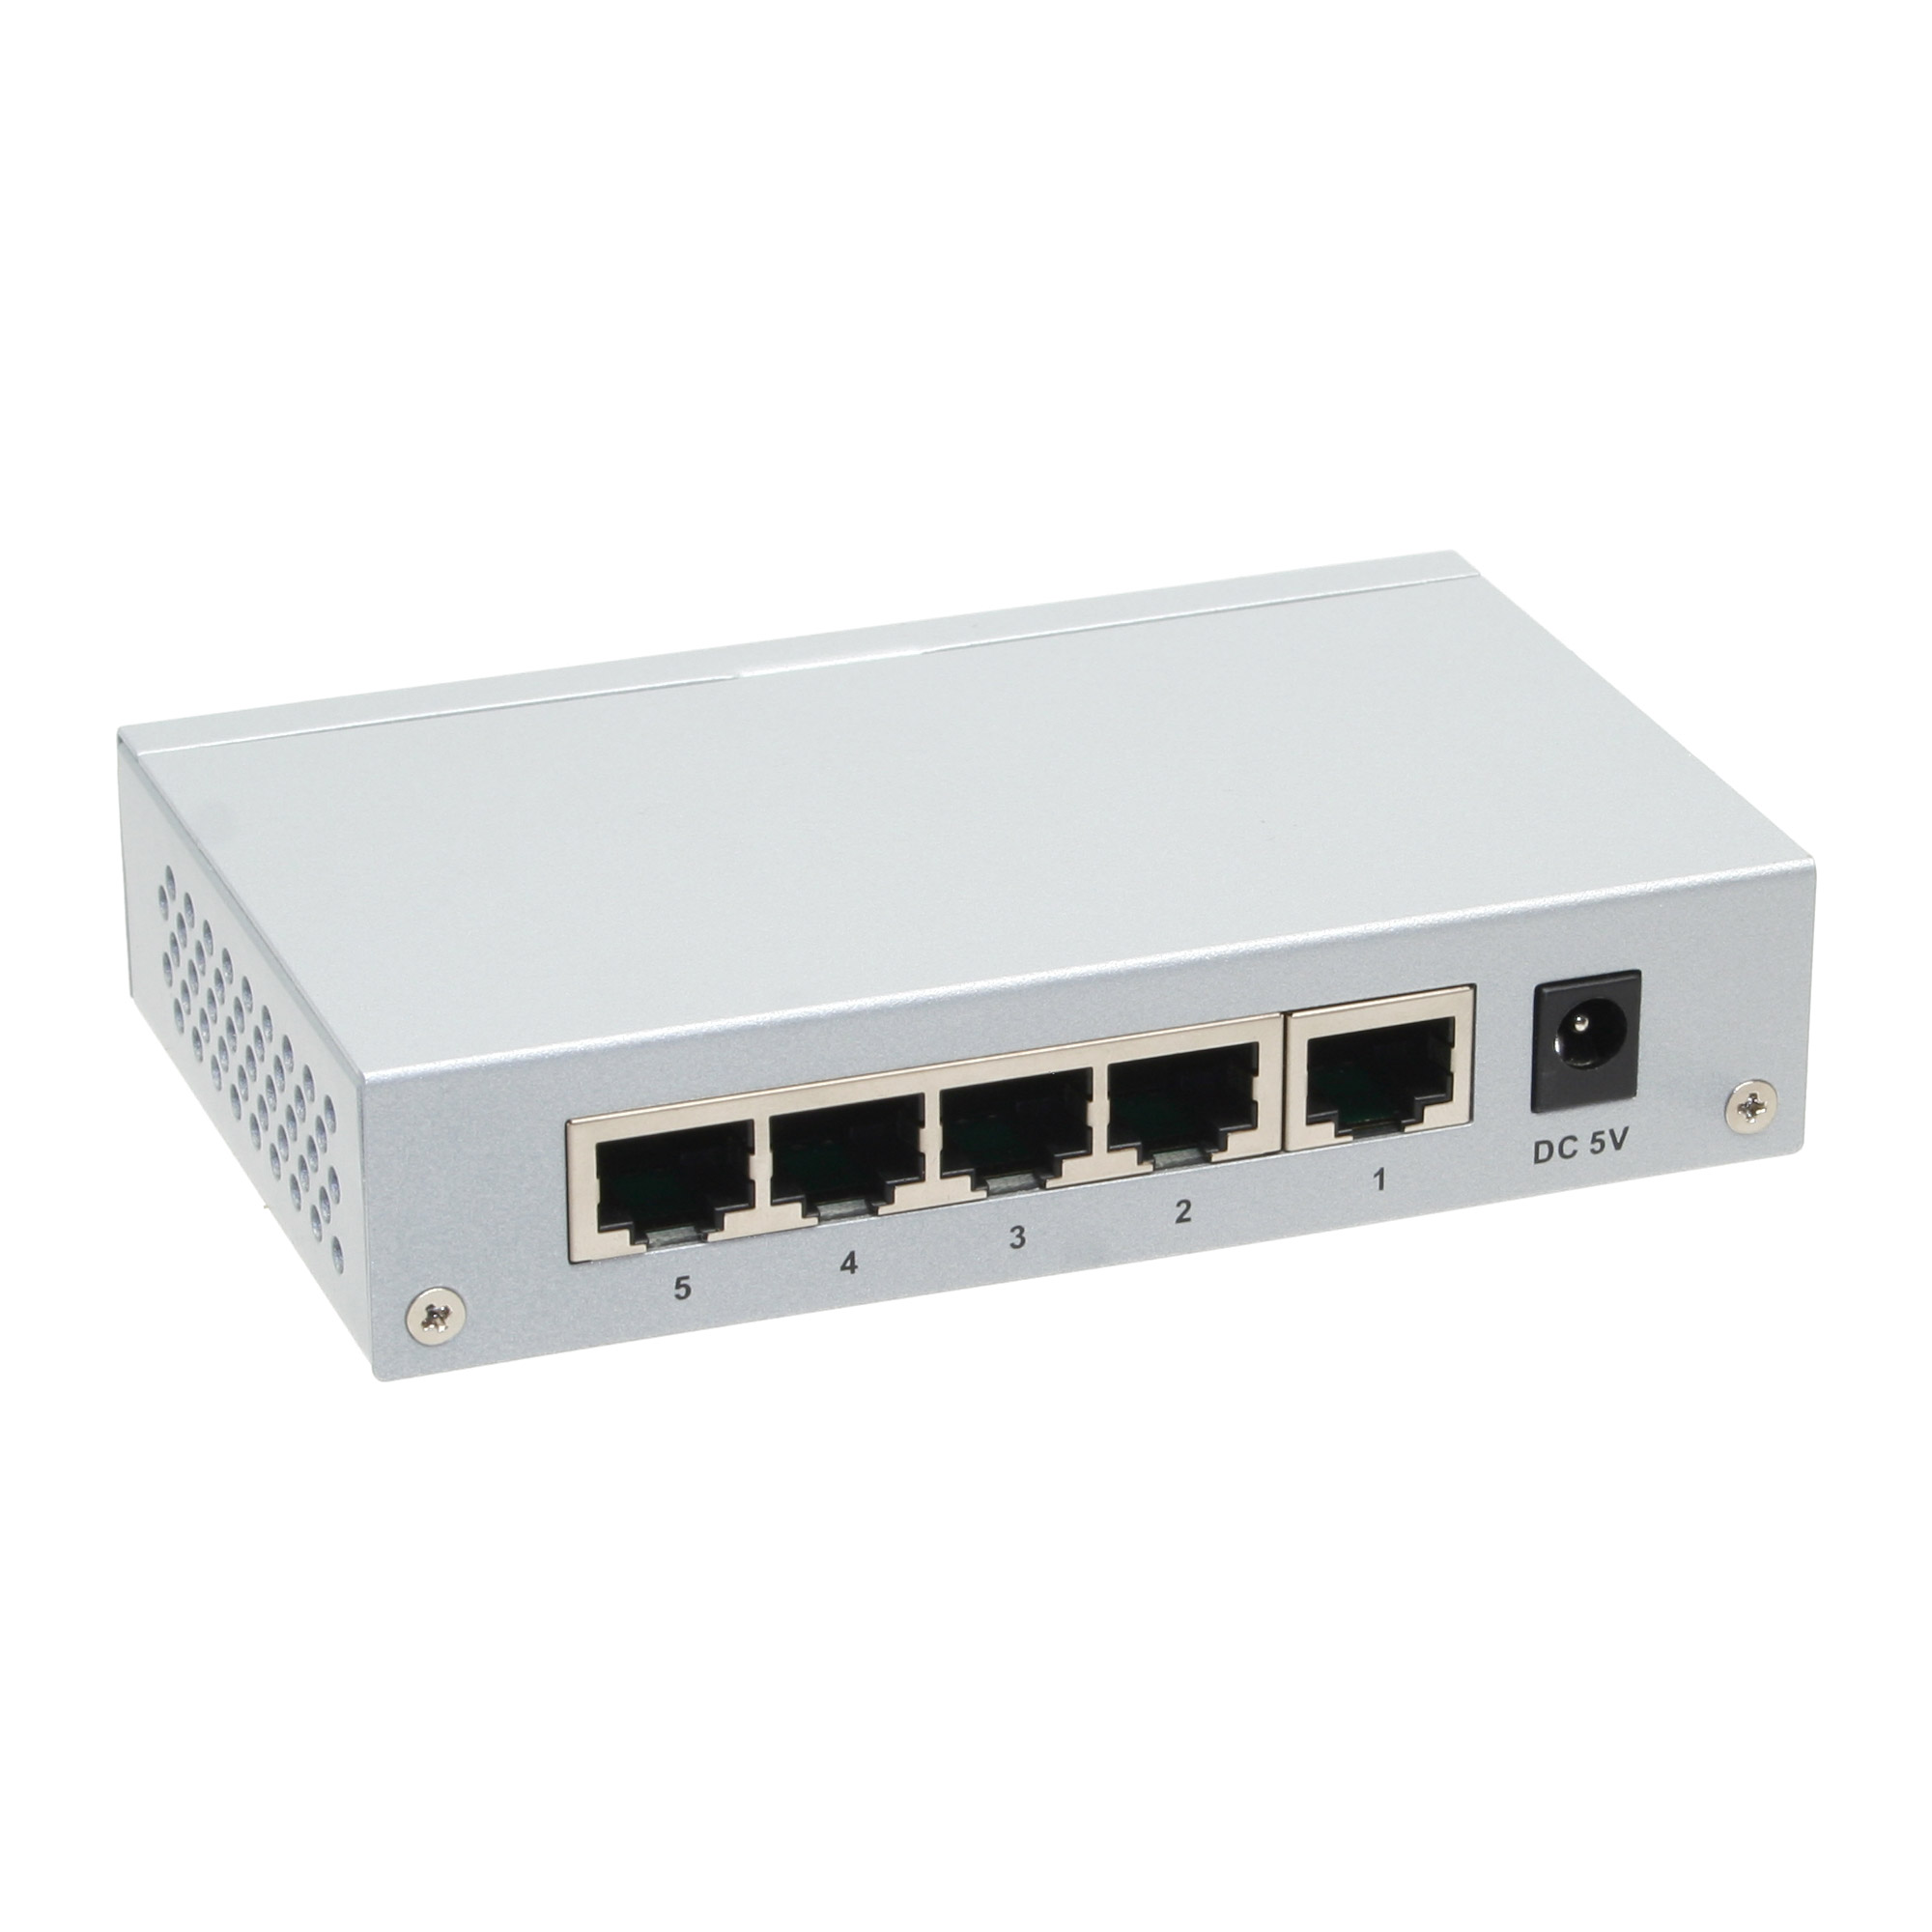 Longshine Gigabit Switch 5-Port LCS-GS7105-E Metall - Switch - 1 Gbps